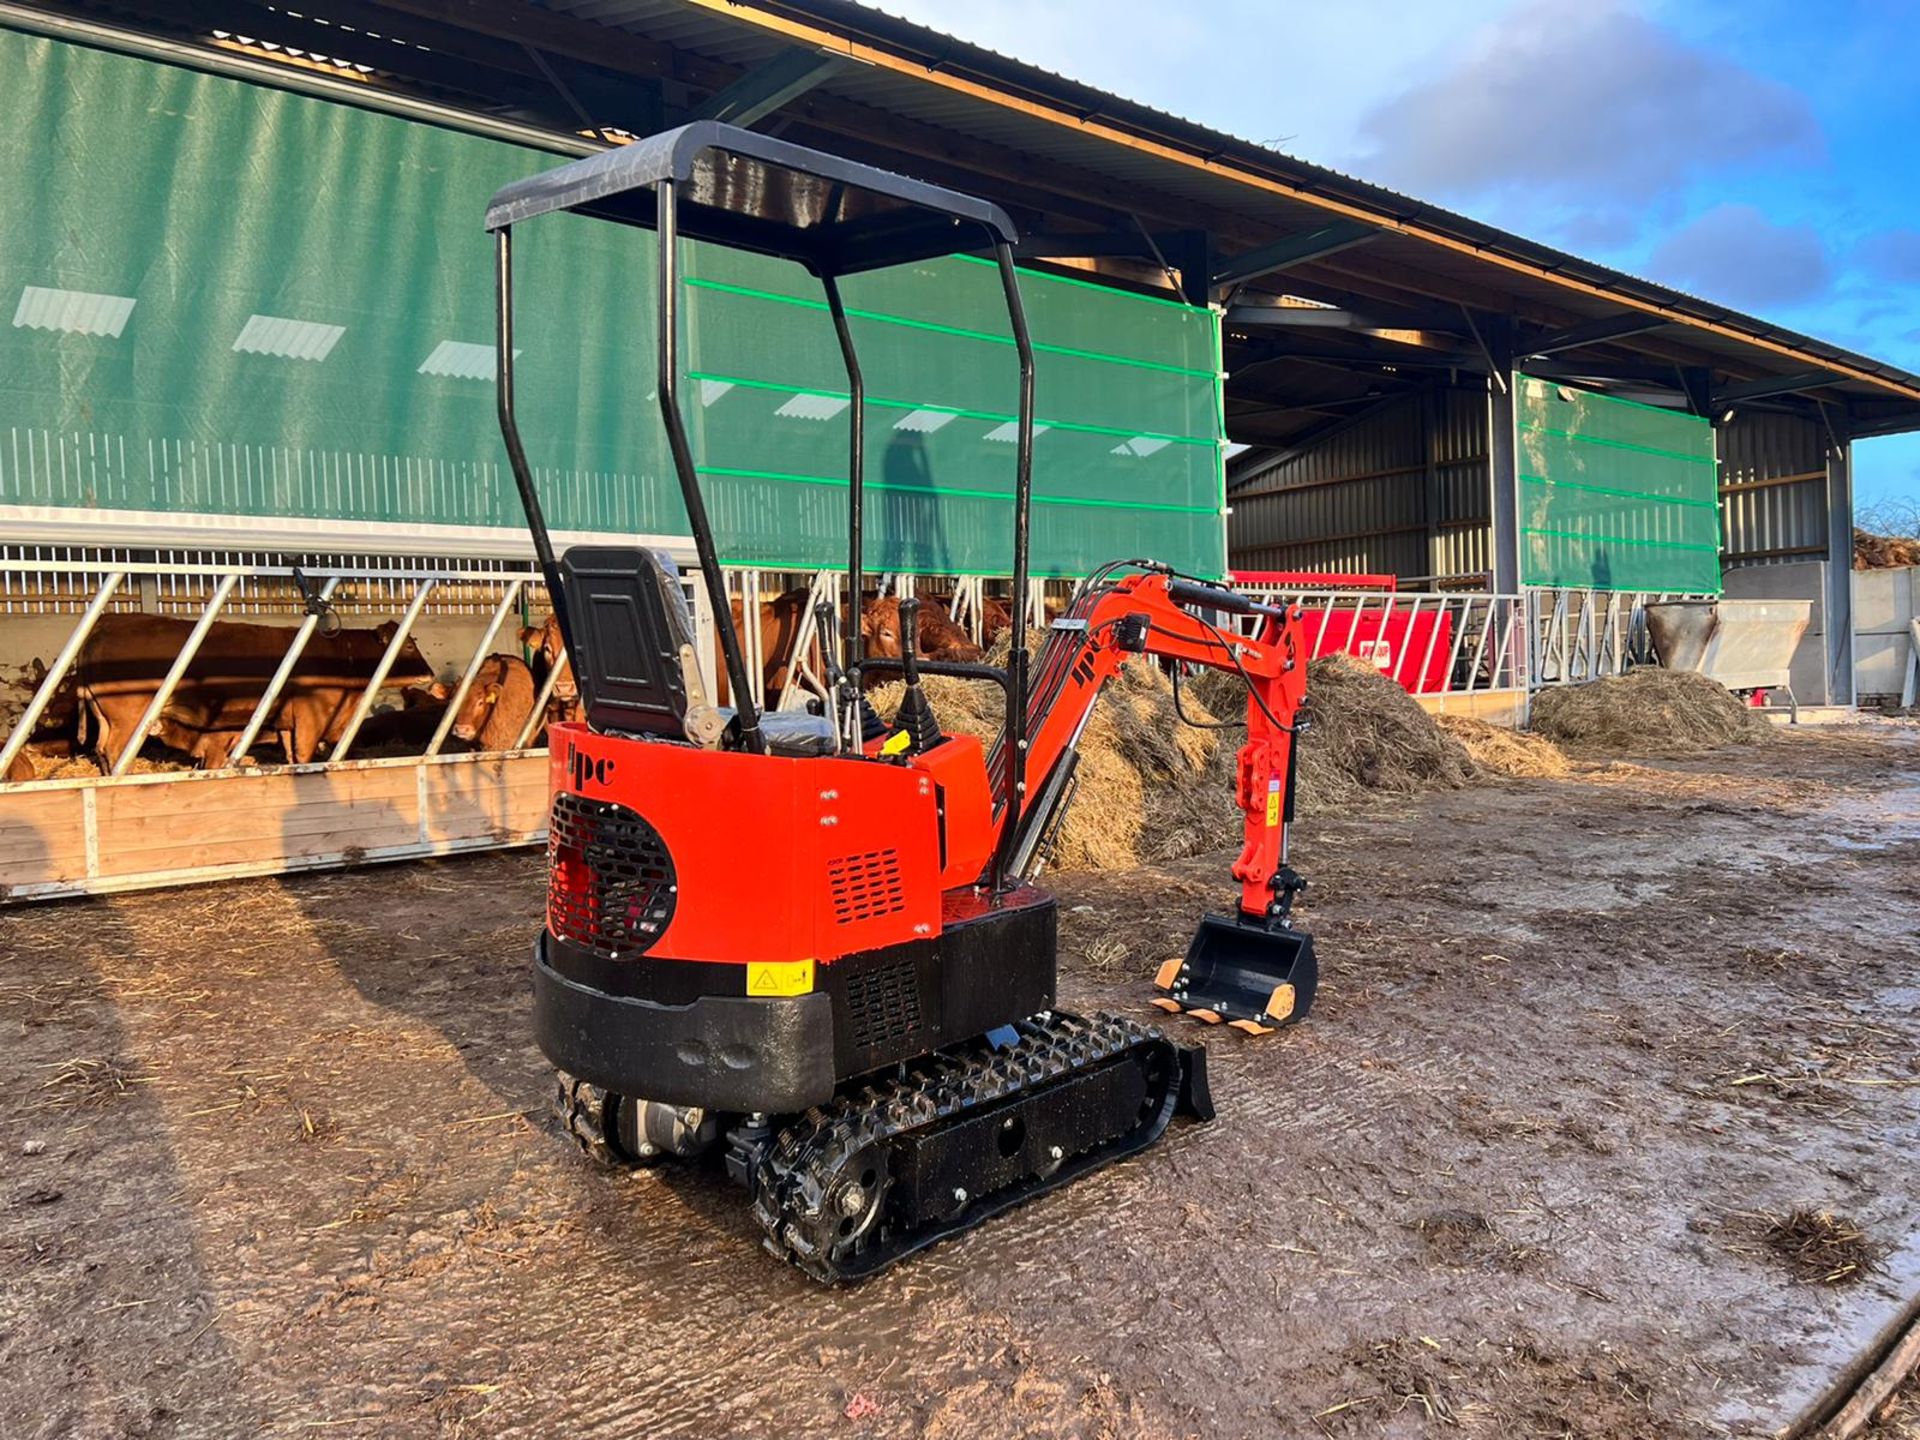 NEW AND UNUSED JPC HT12 1 TON MINI DIGGER, RUNS DRIVES AND DIGS, PIPED FOR FRONT ATTACHMENTS - Image 5 of 11